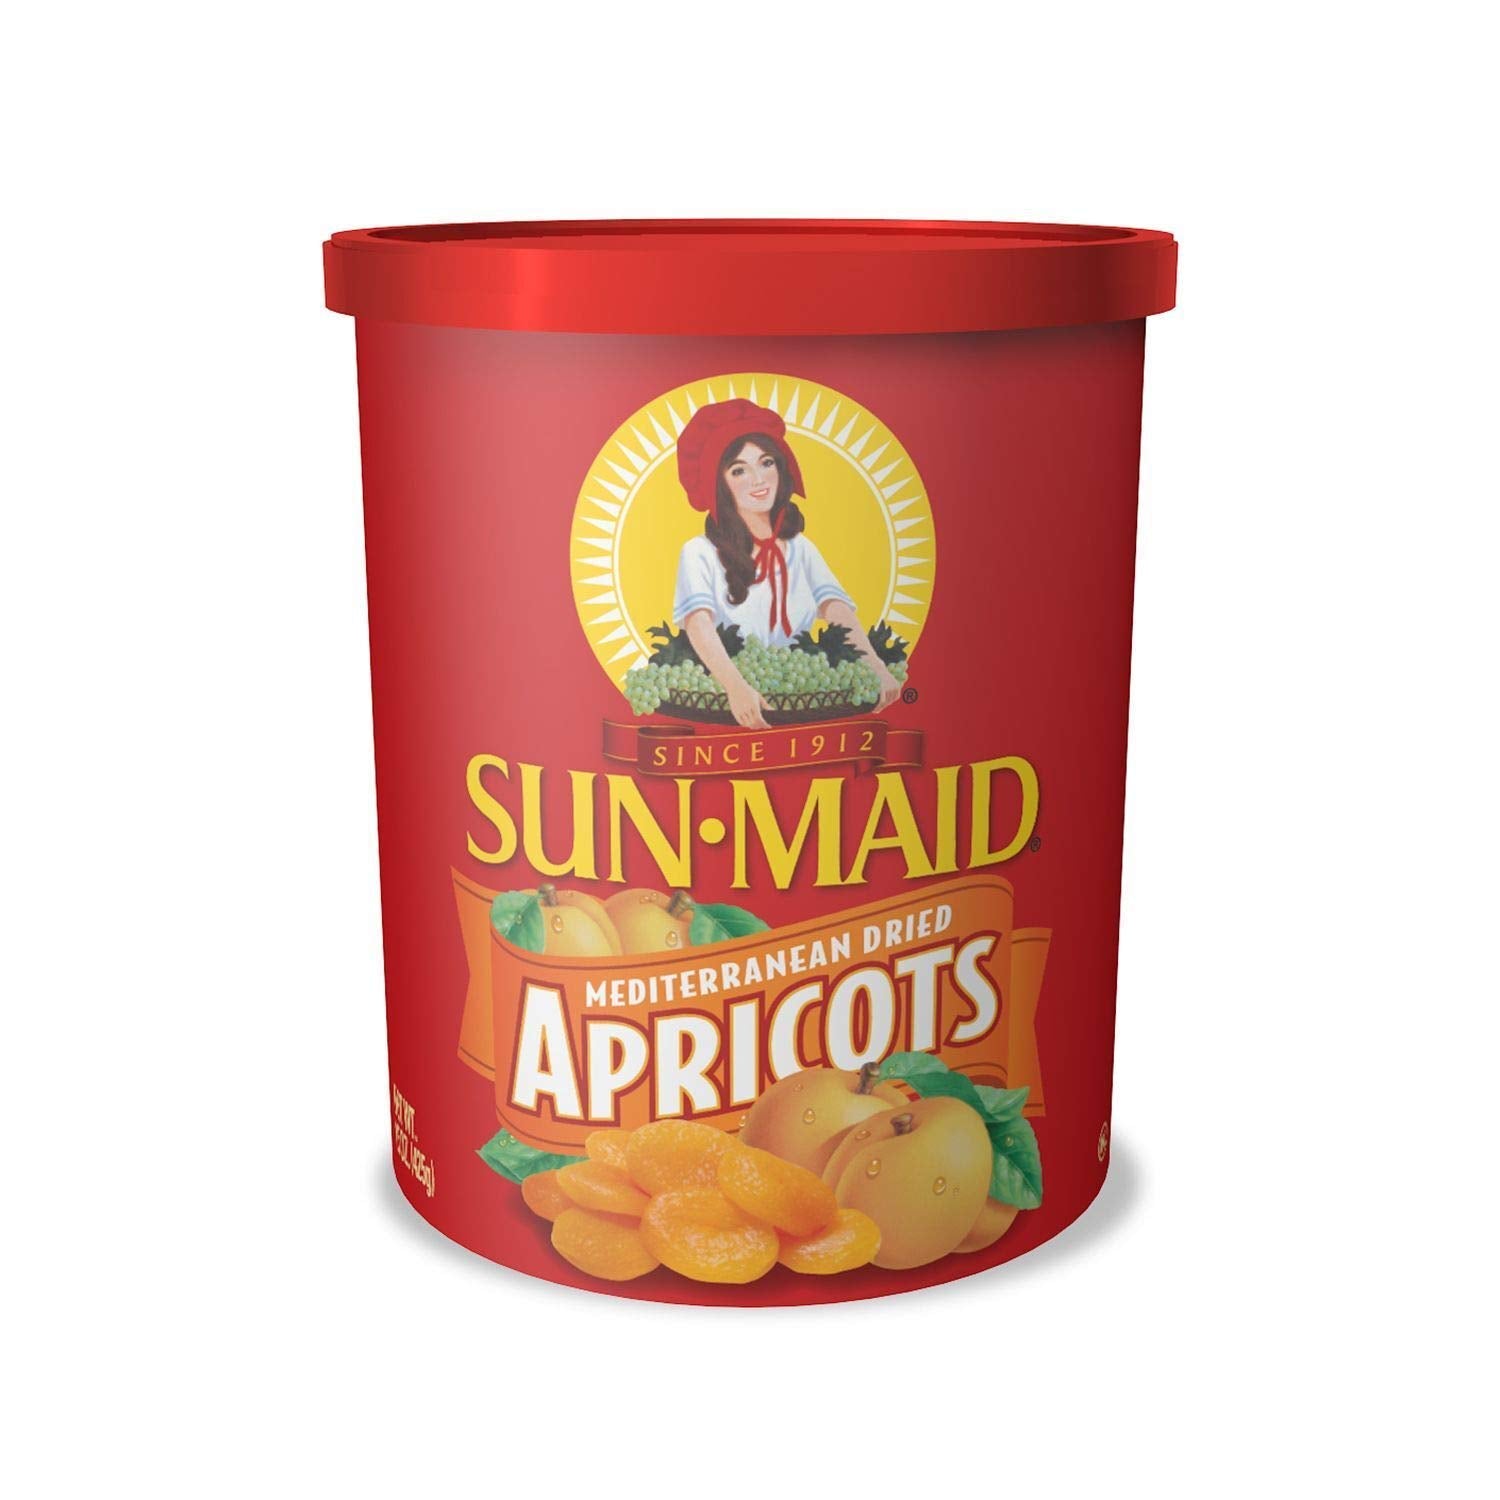 Sun-Maid Mediterranean Dried Apricots - 15 oz Canister - Mediterranean Apricot Dried Fruit Snack for Lunches, Snacks, and Natural Sweeteners